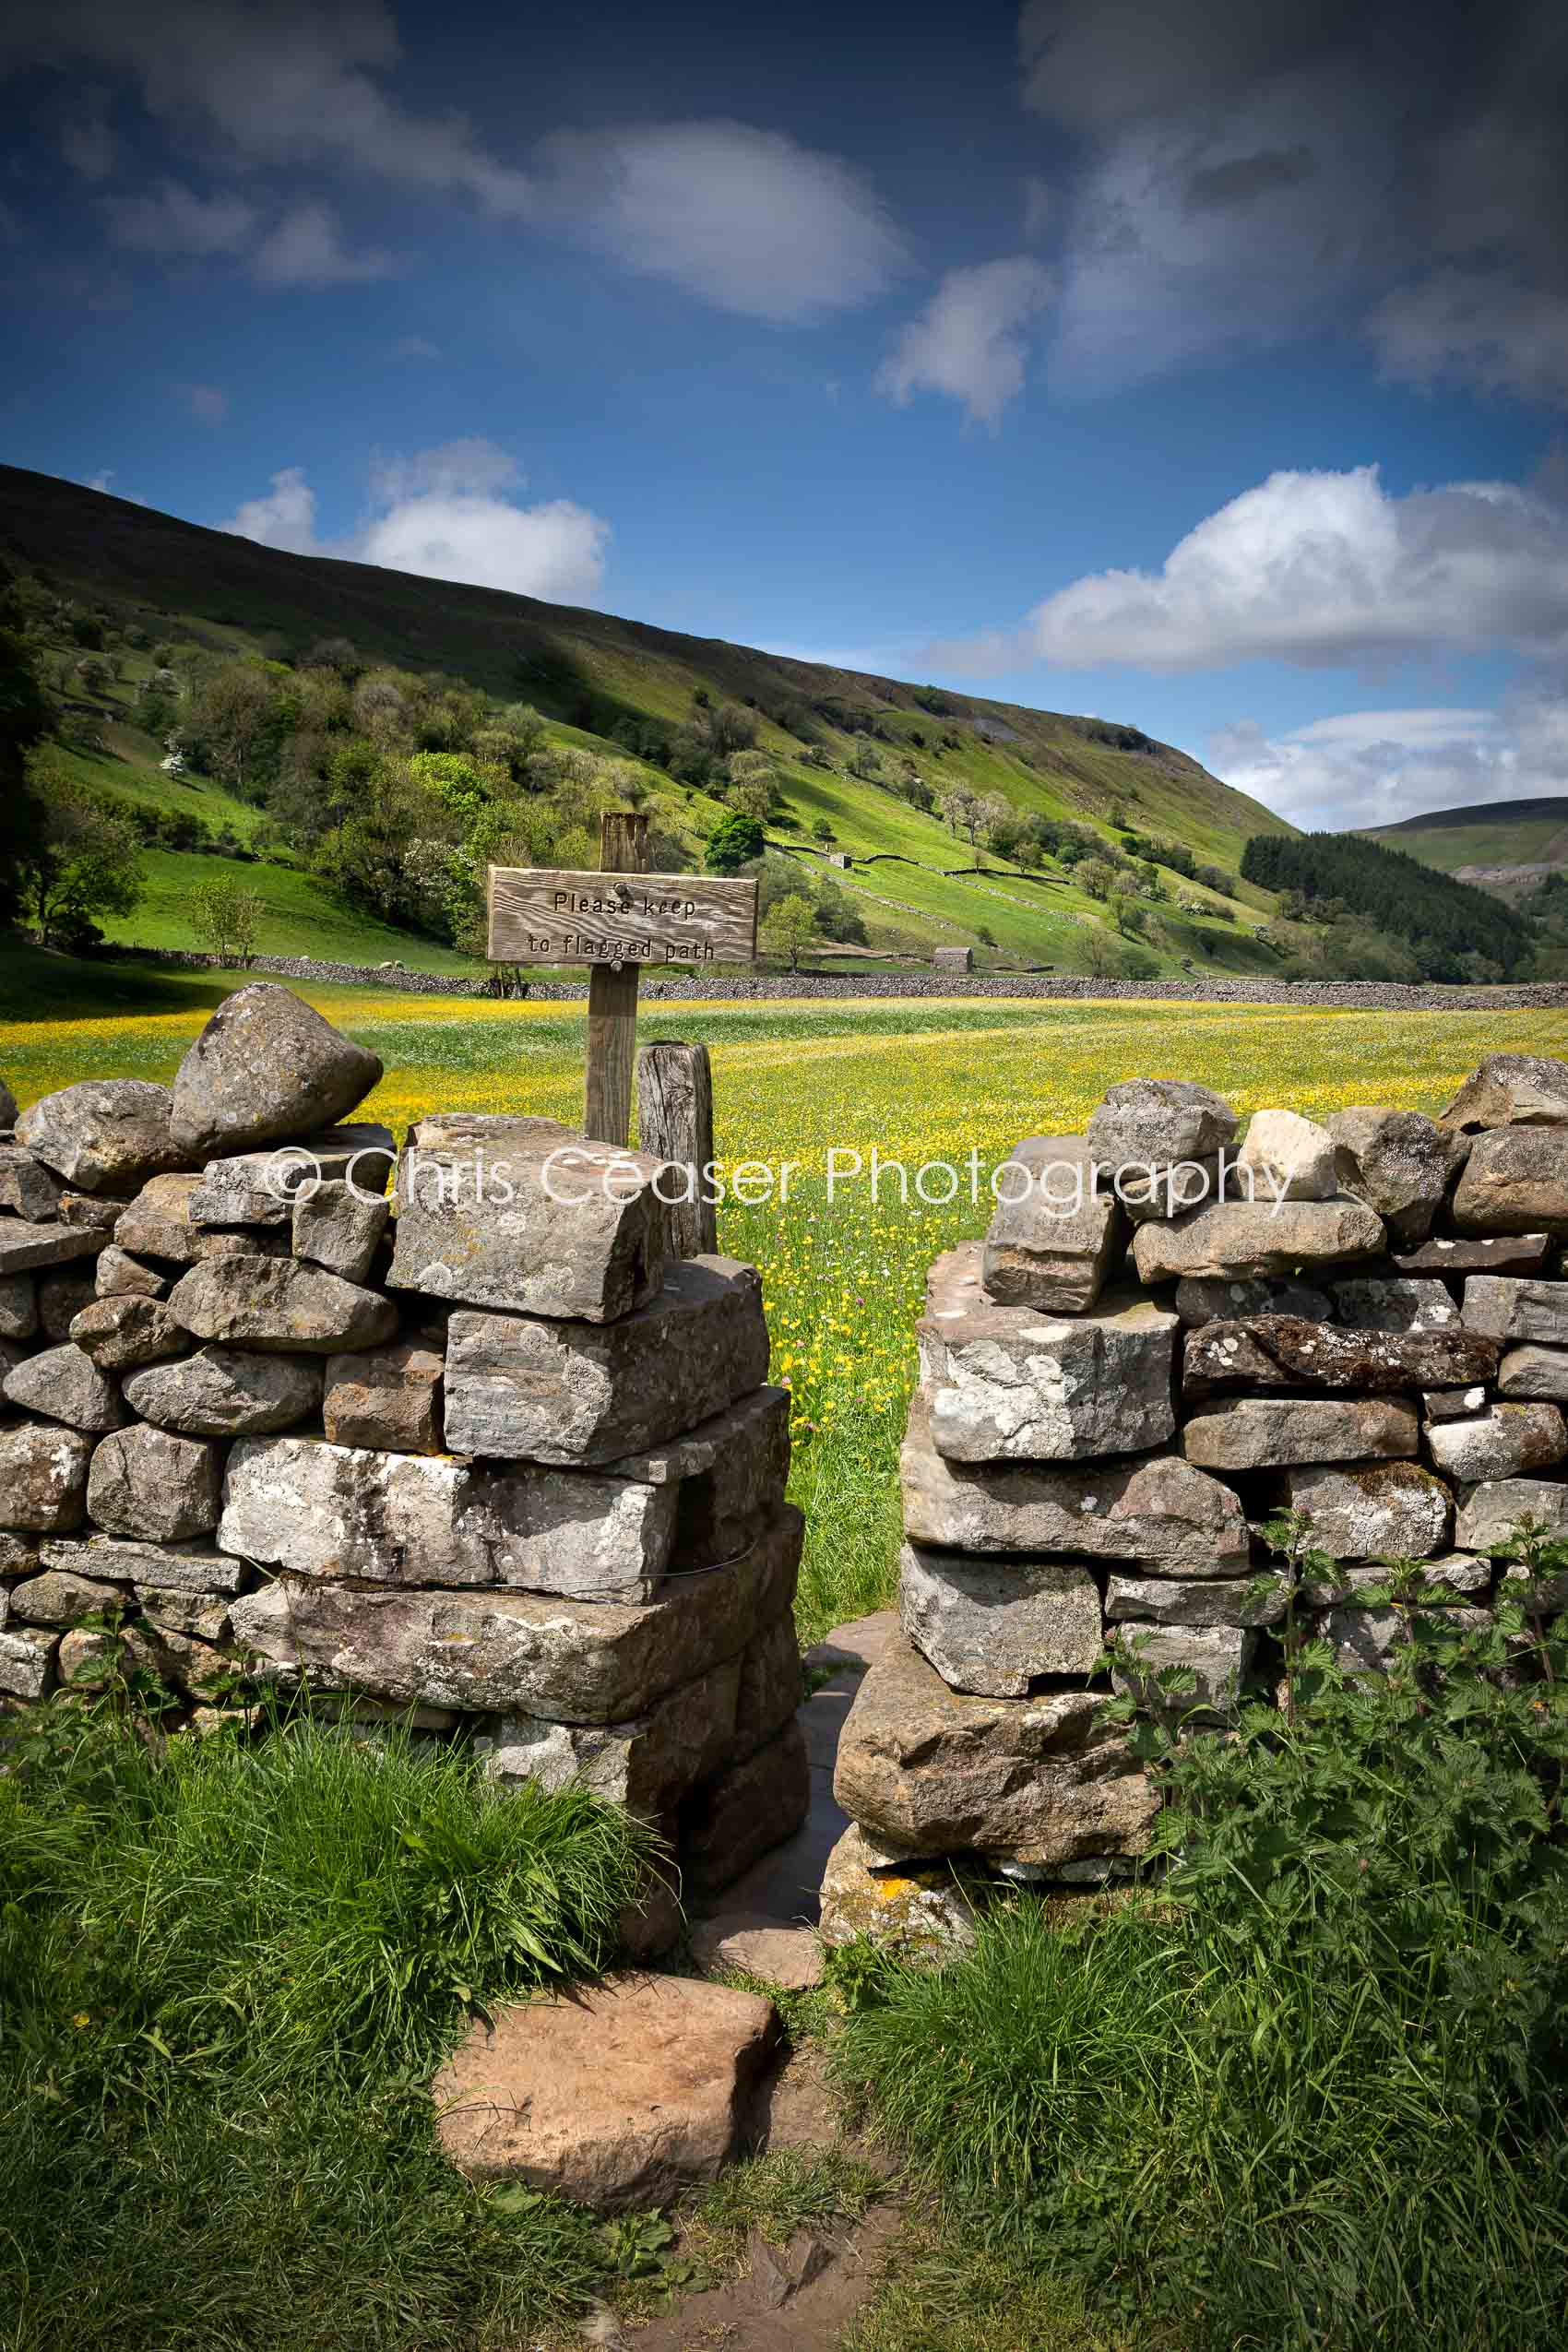 Into the Keld Valley, Yorkshire Dales